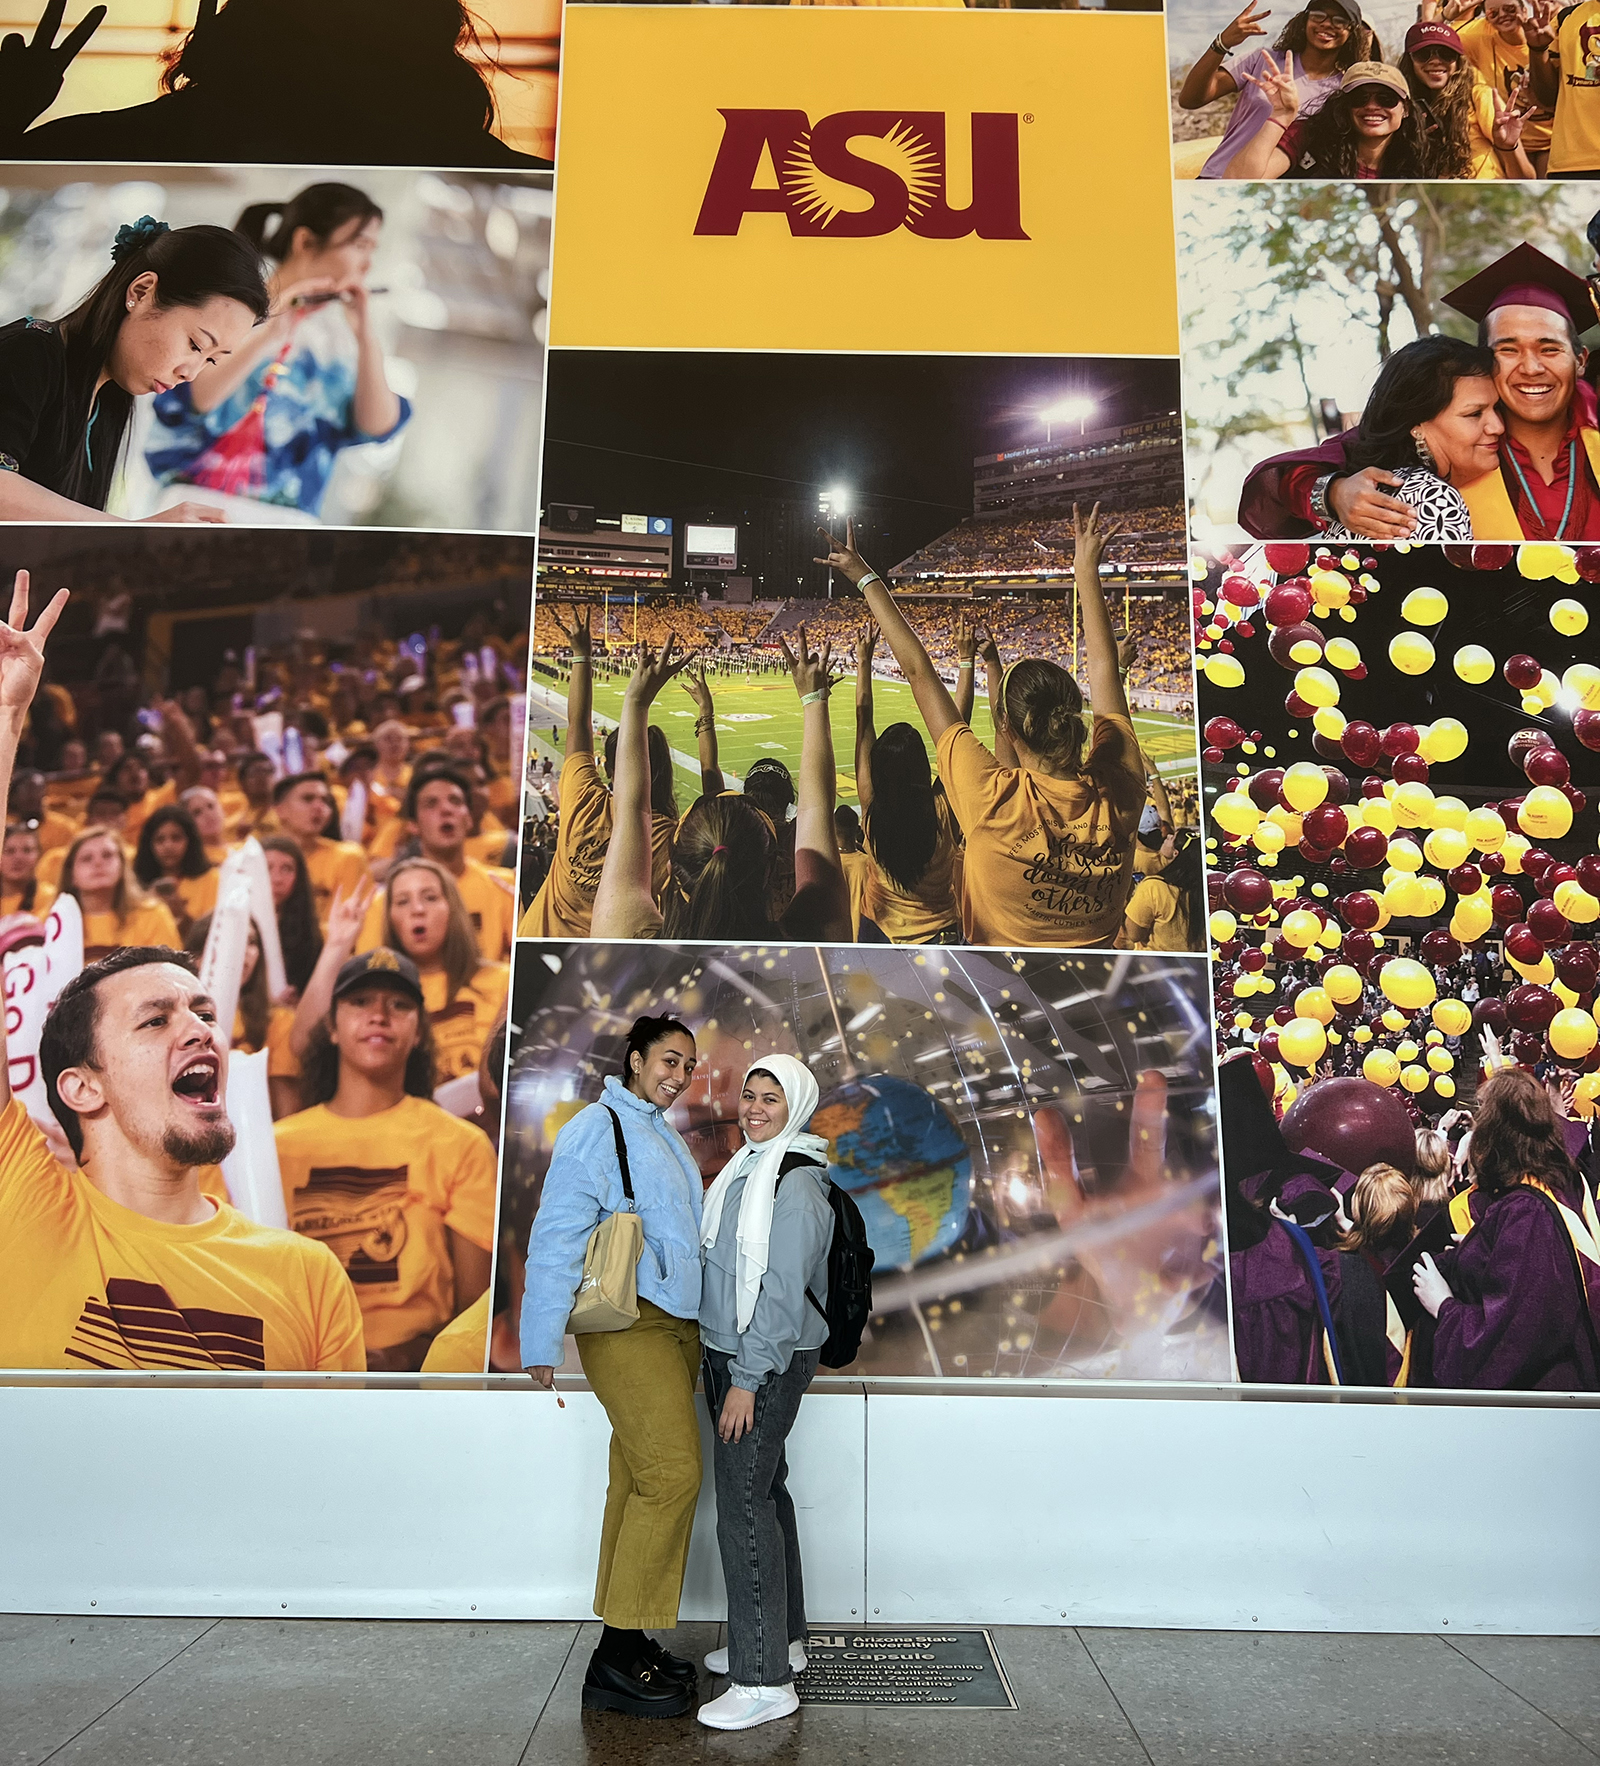 Two exchange students in front of ASU sign